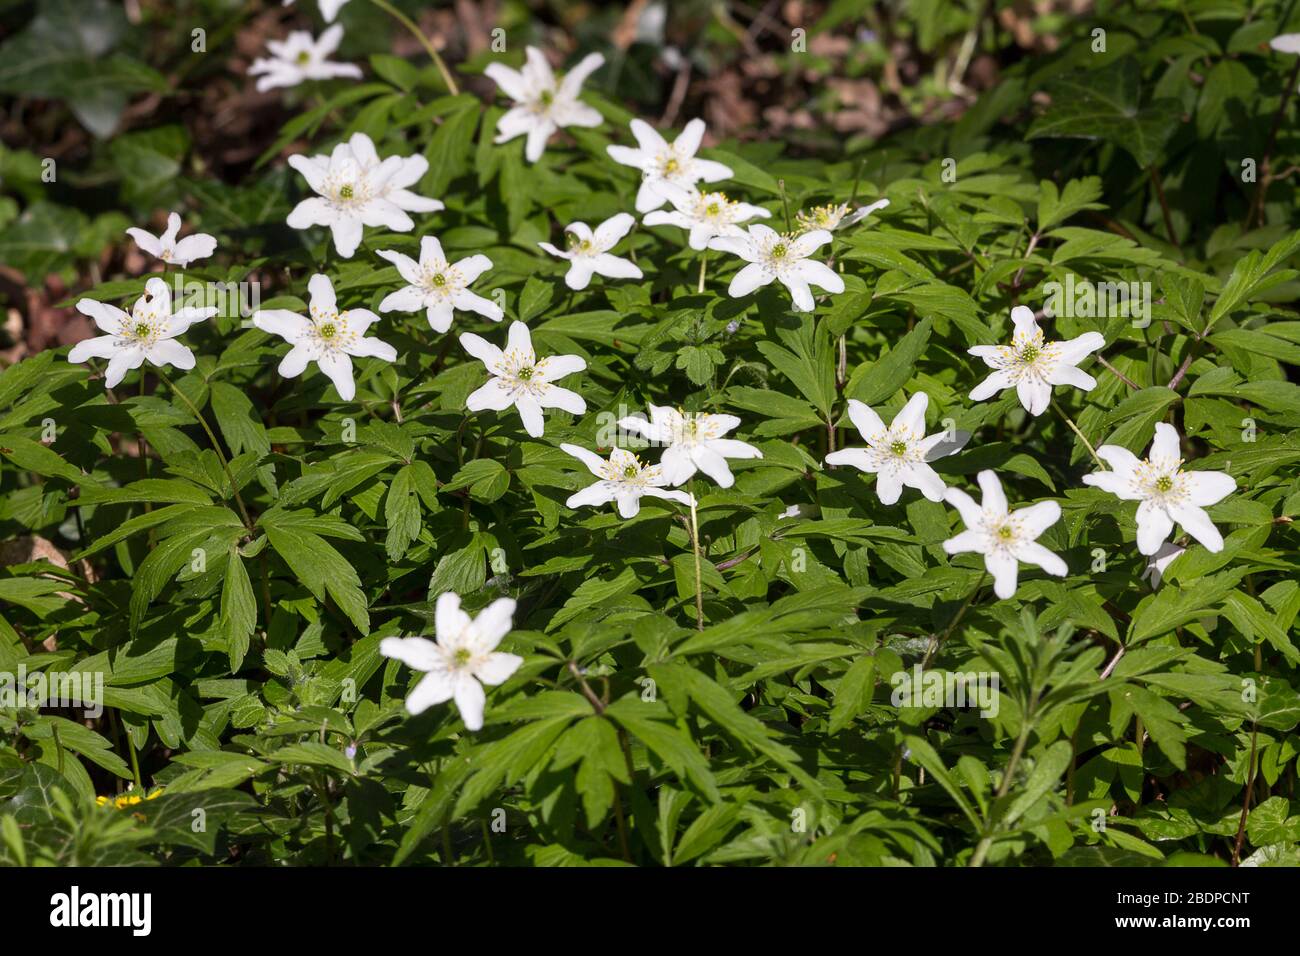 Wood anemone nemorosa spring white flowering plant long stems and leaves devided into multiple lobes and six petal flowers spread over woodland floor. Stock Photo